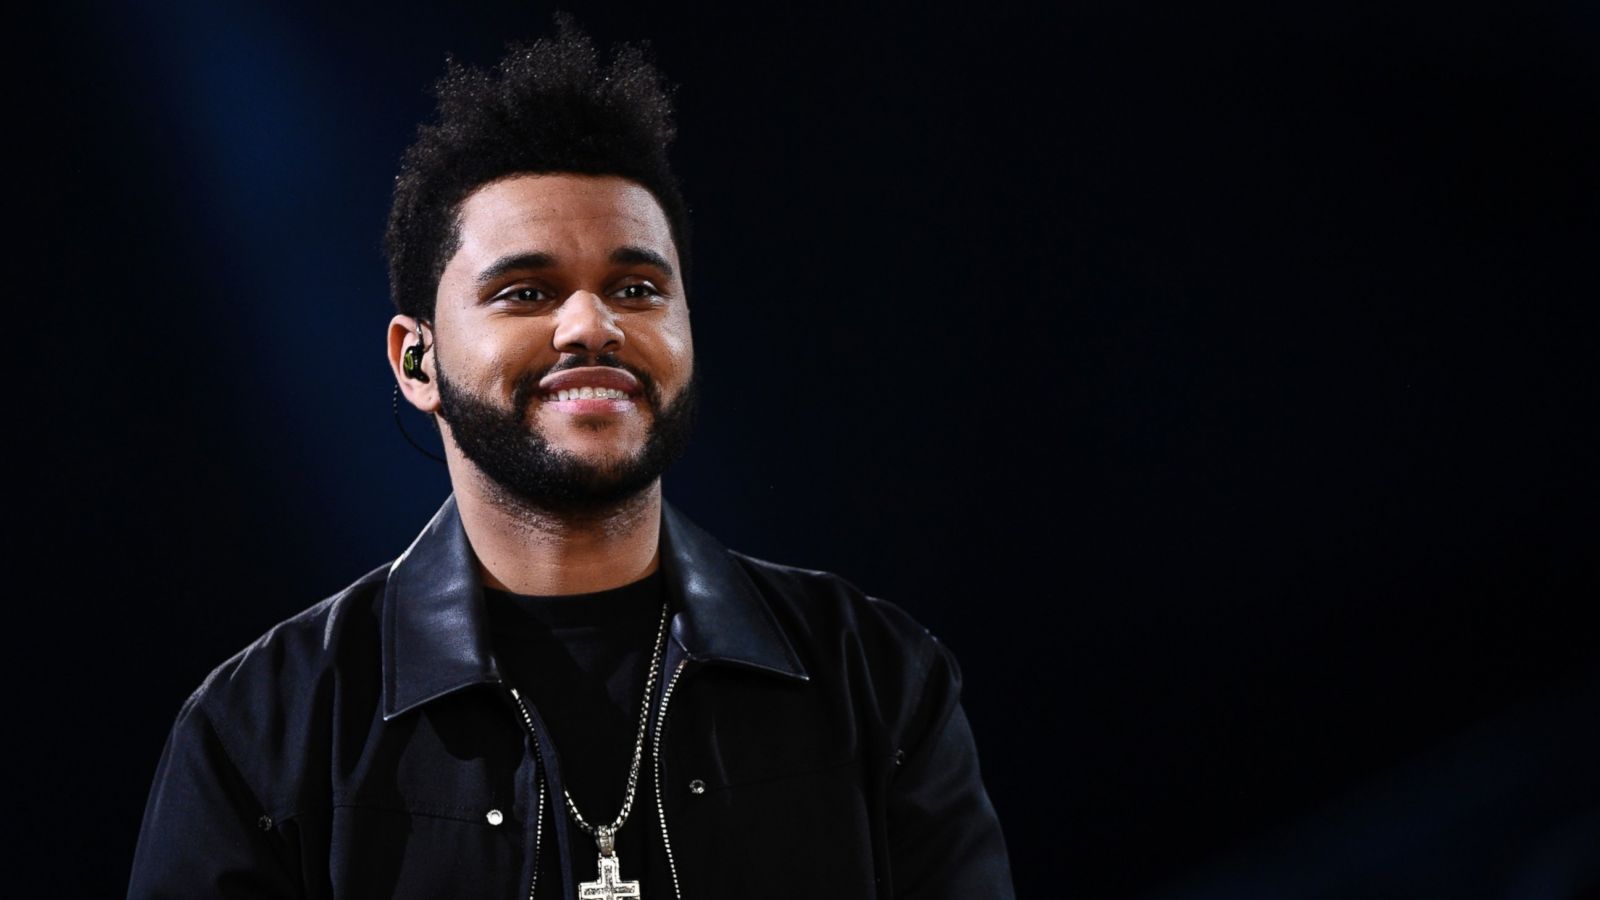 The Weeknd Opens Up About His Dark Past ABC News